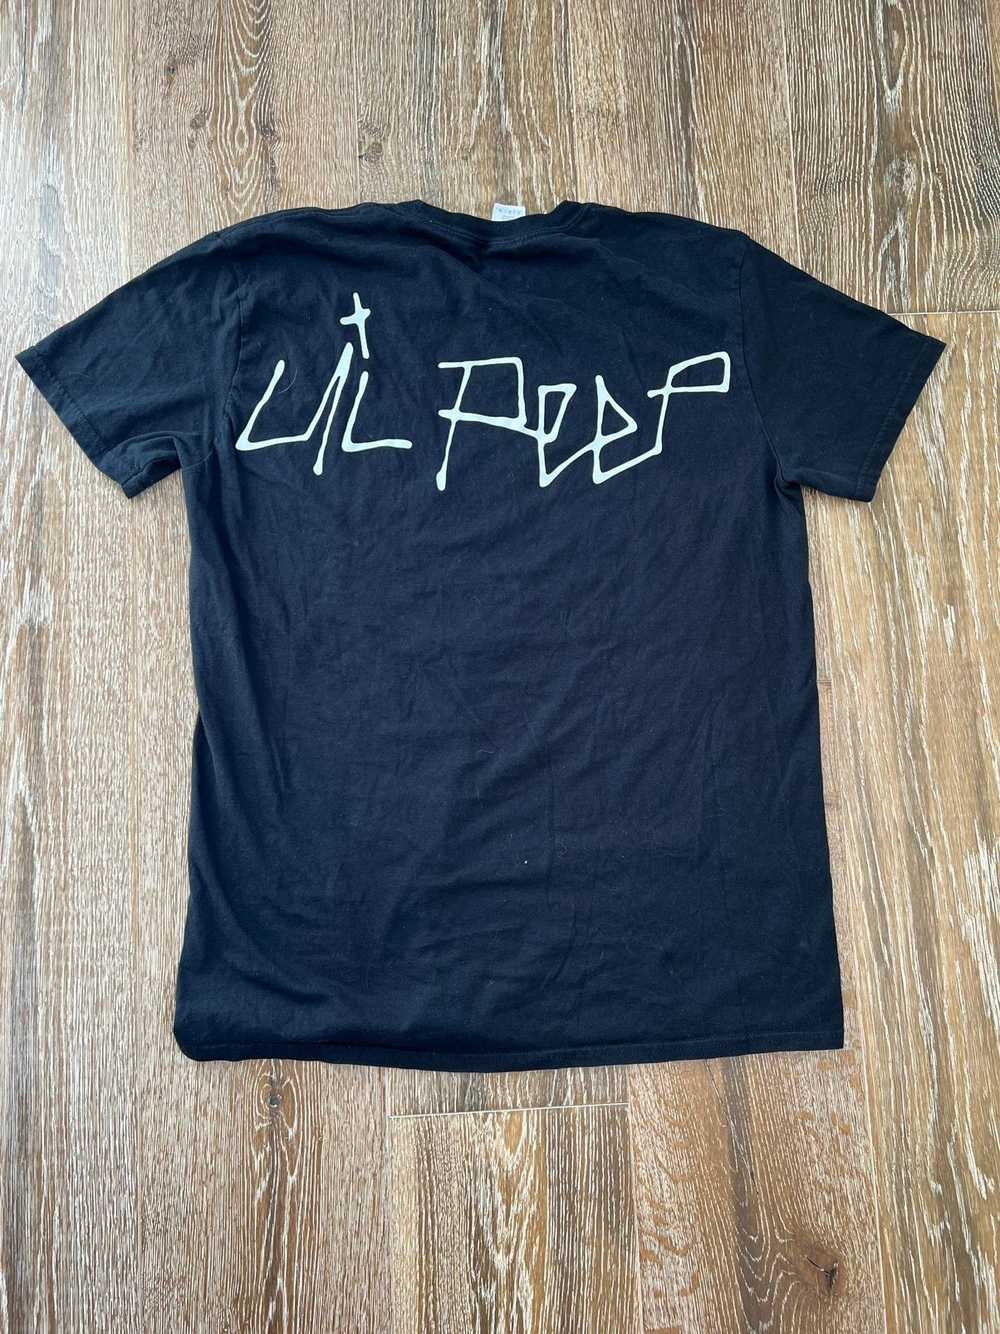 LIL PEEP Lil peep come over when you’re sober tee - image 2